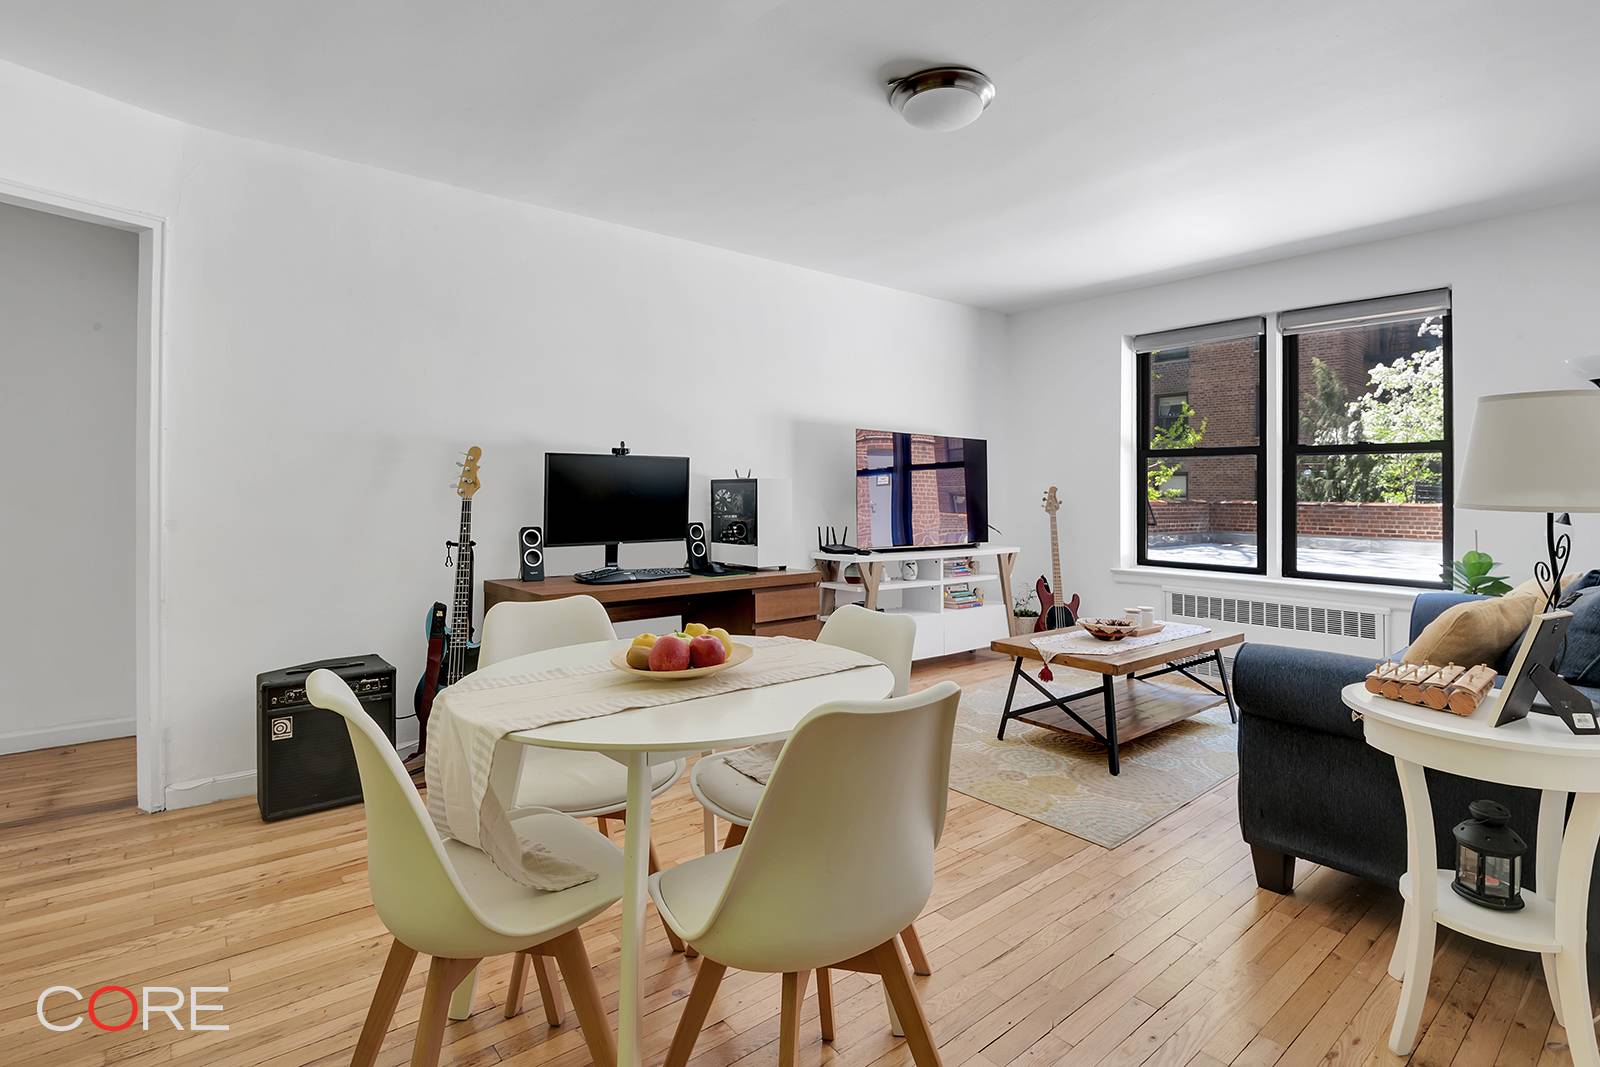 Spanning both east and west exposures, including surrounding greenery, this recently renovated two bedroom, one bath home features immaculately refinished hardwood floors, a double galley kitchen with a dishwasher, plentiful ...